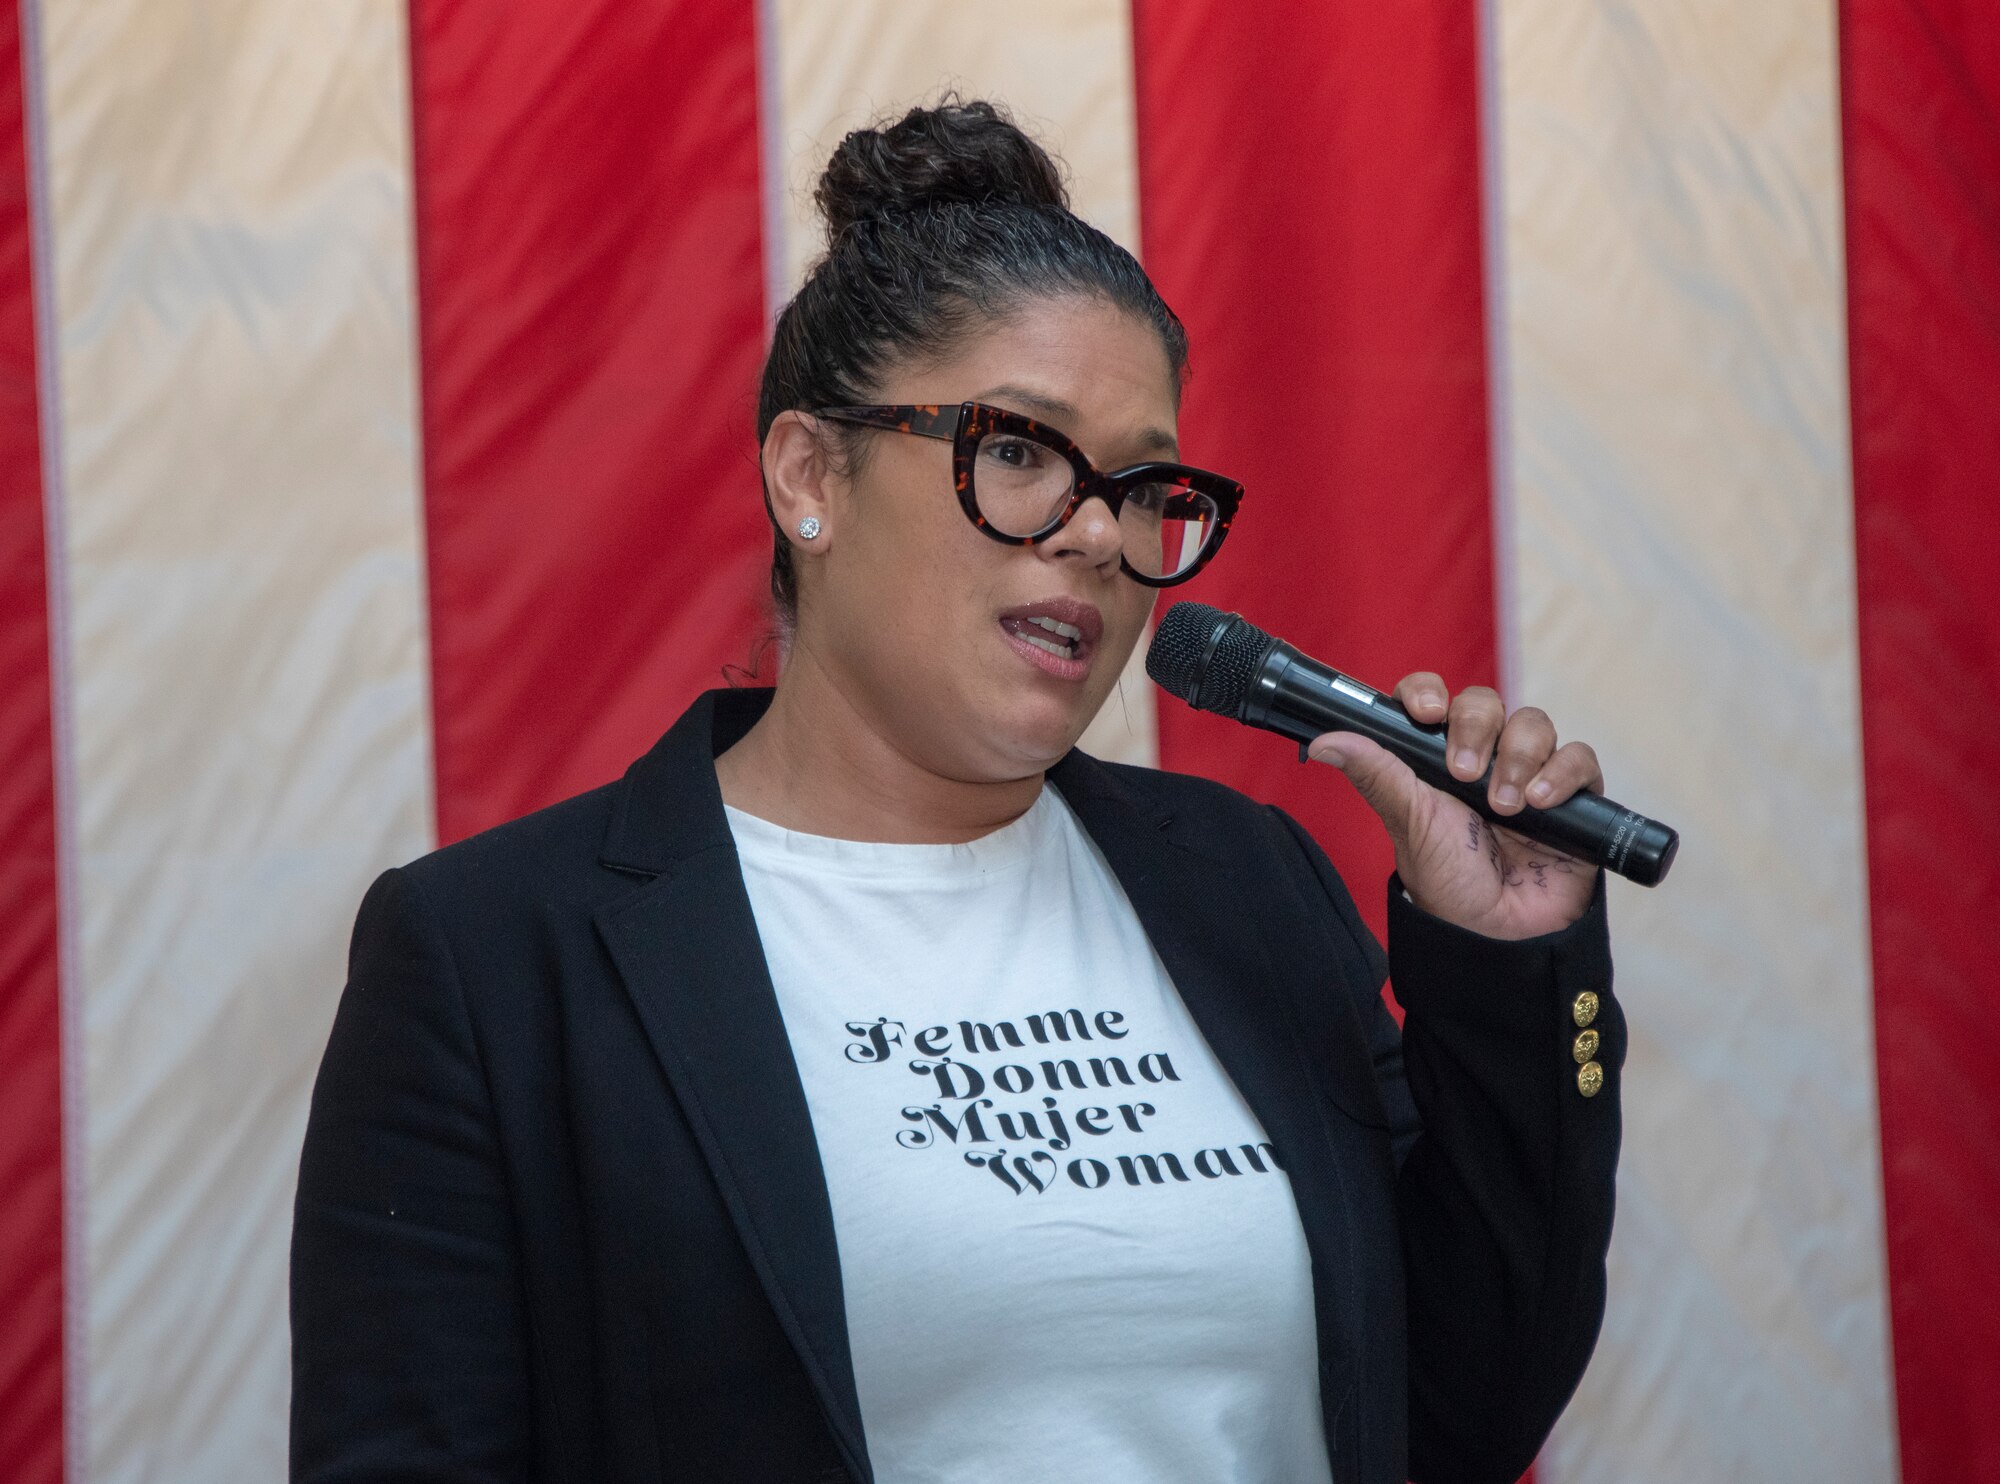 U.S. Air Force Master Sgt. Sophia Rodriguez, 144th Fighter Wing, delivers remarks during the Women’s History Month social gathering, March 20, 2019, at Travis Air Force Base, California. Since 1987, the month of March has been designated to celebrate the historical and ongoing achievements and contributions of women. Members of the Women Inspiring the Next Generation’s Success committee were responsible for organizing the event which included an exhibit highlighting extraordinary female heroes and featured speakers prominent in the Travis community. (U.S. Air Force photo by Heide Couch)